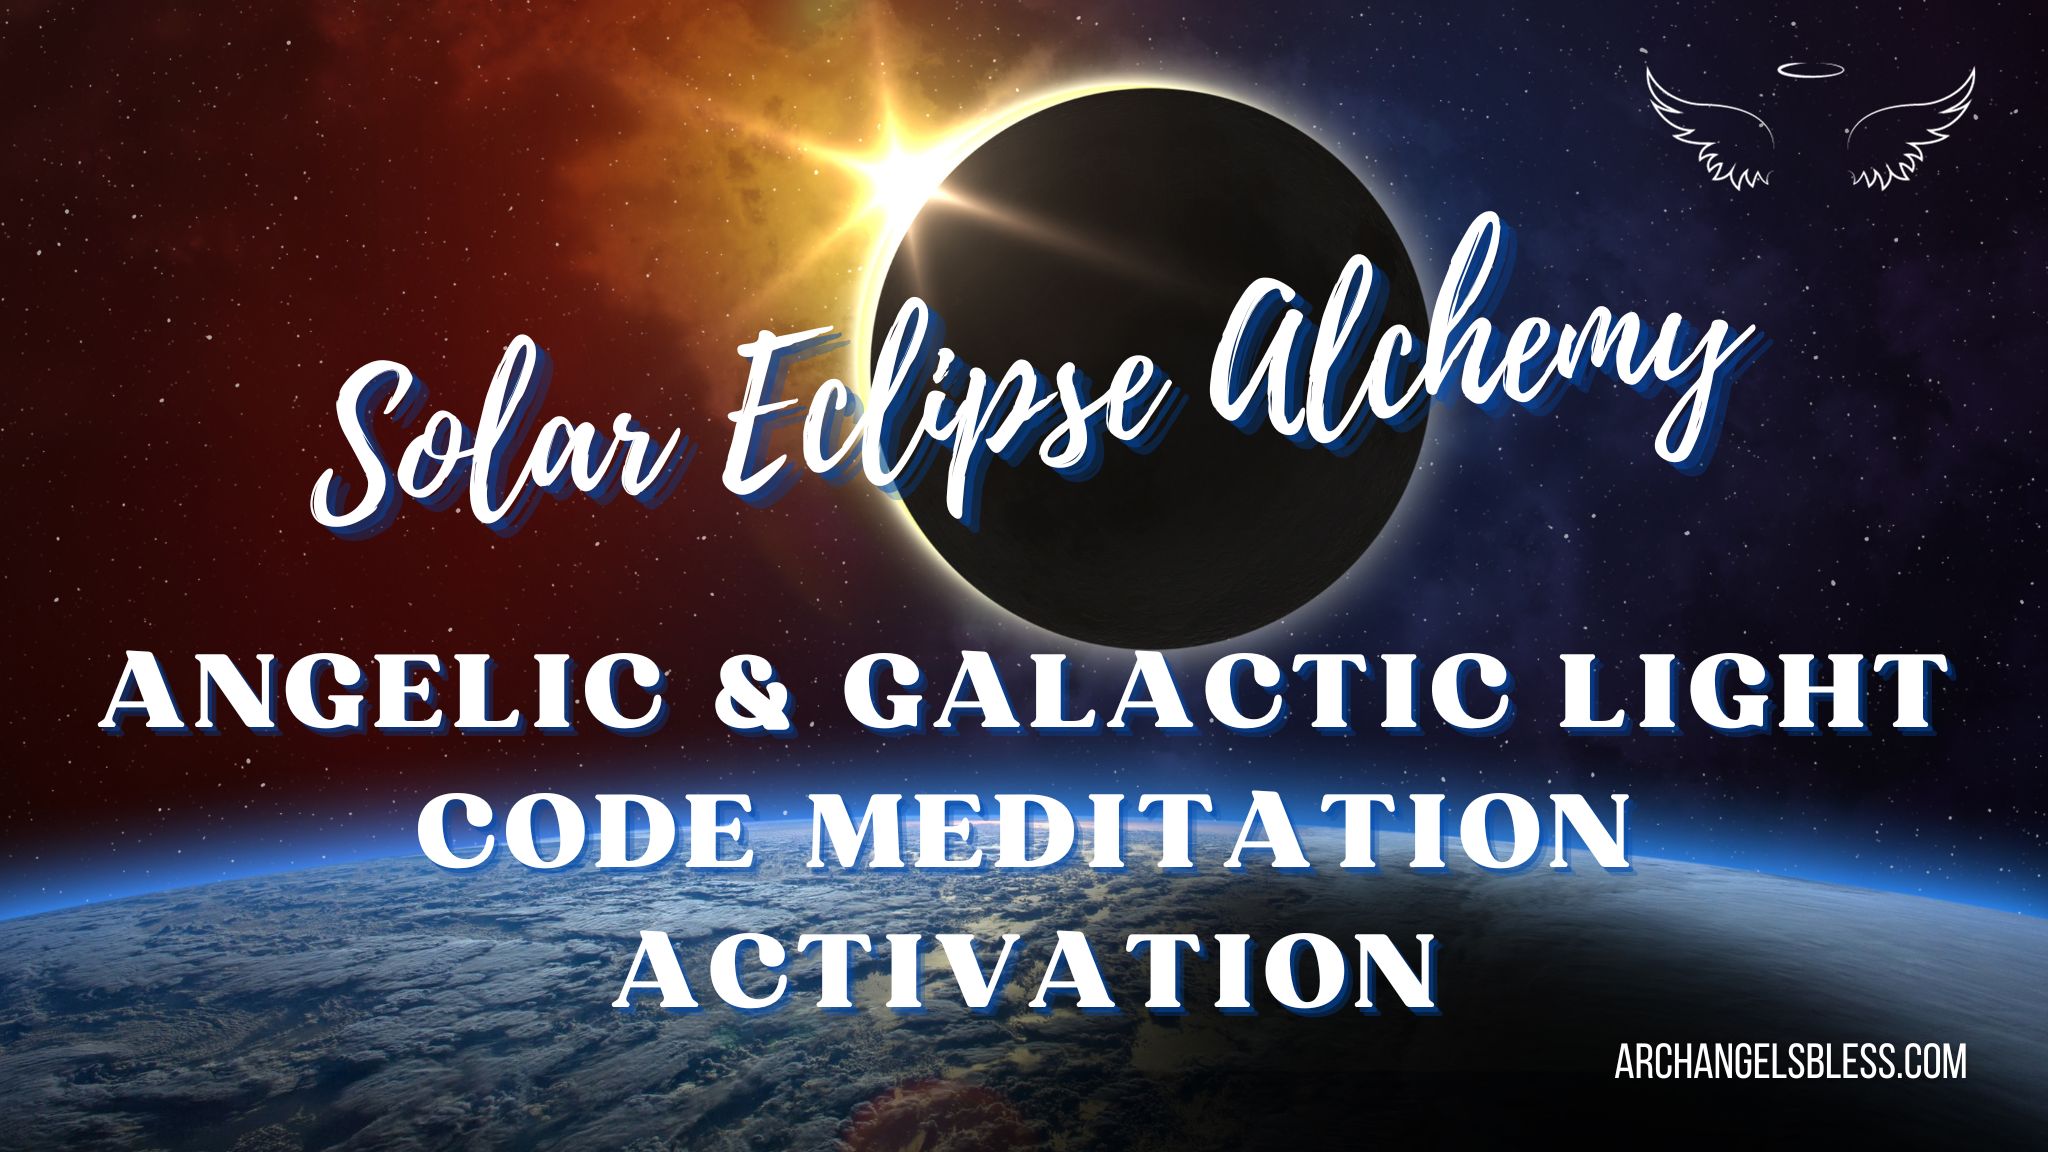 Solar Eclipse Alchemy: Angelic & Galactic Light Code Meditation Activation MP3 DOWNLOAD